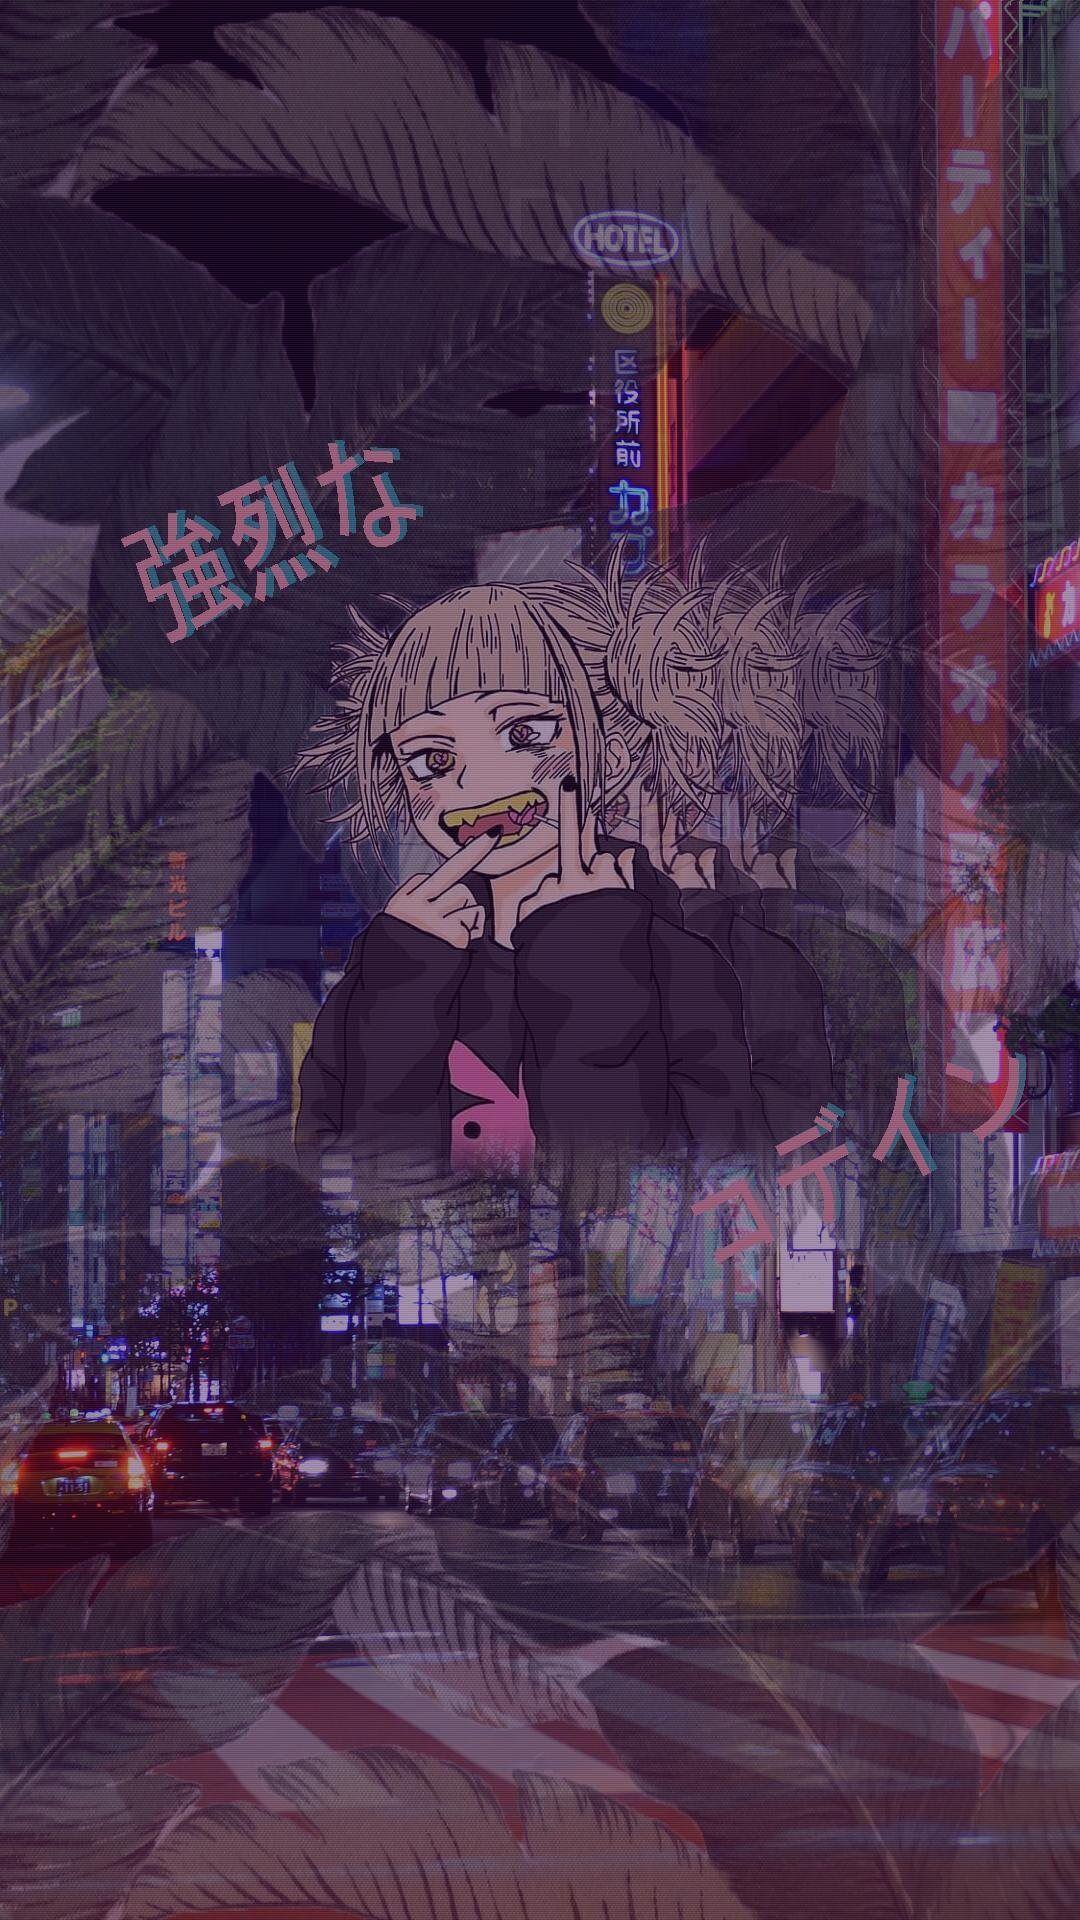 Anime Aesthetic Iphone Wallpapers - Wallpaper Cave